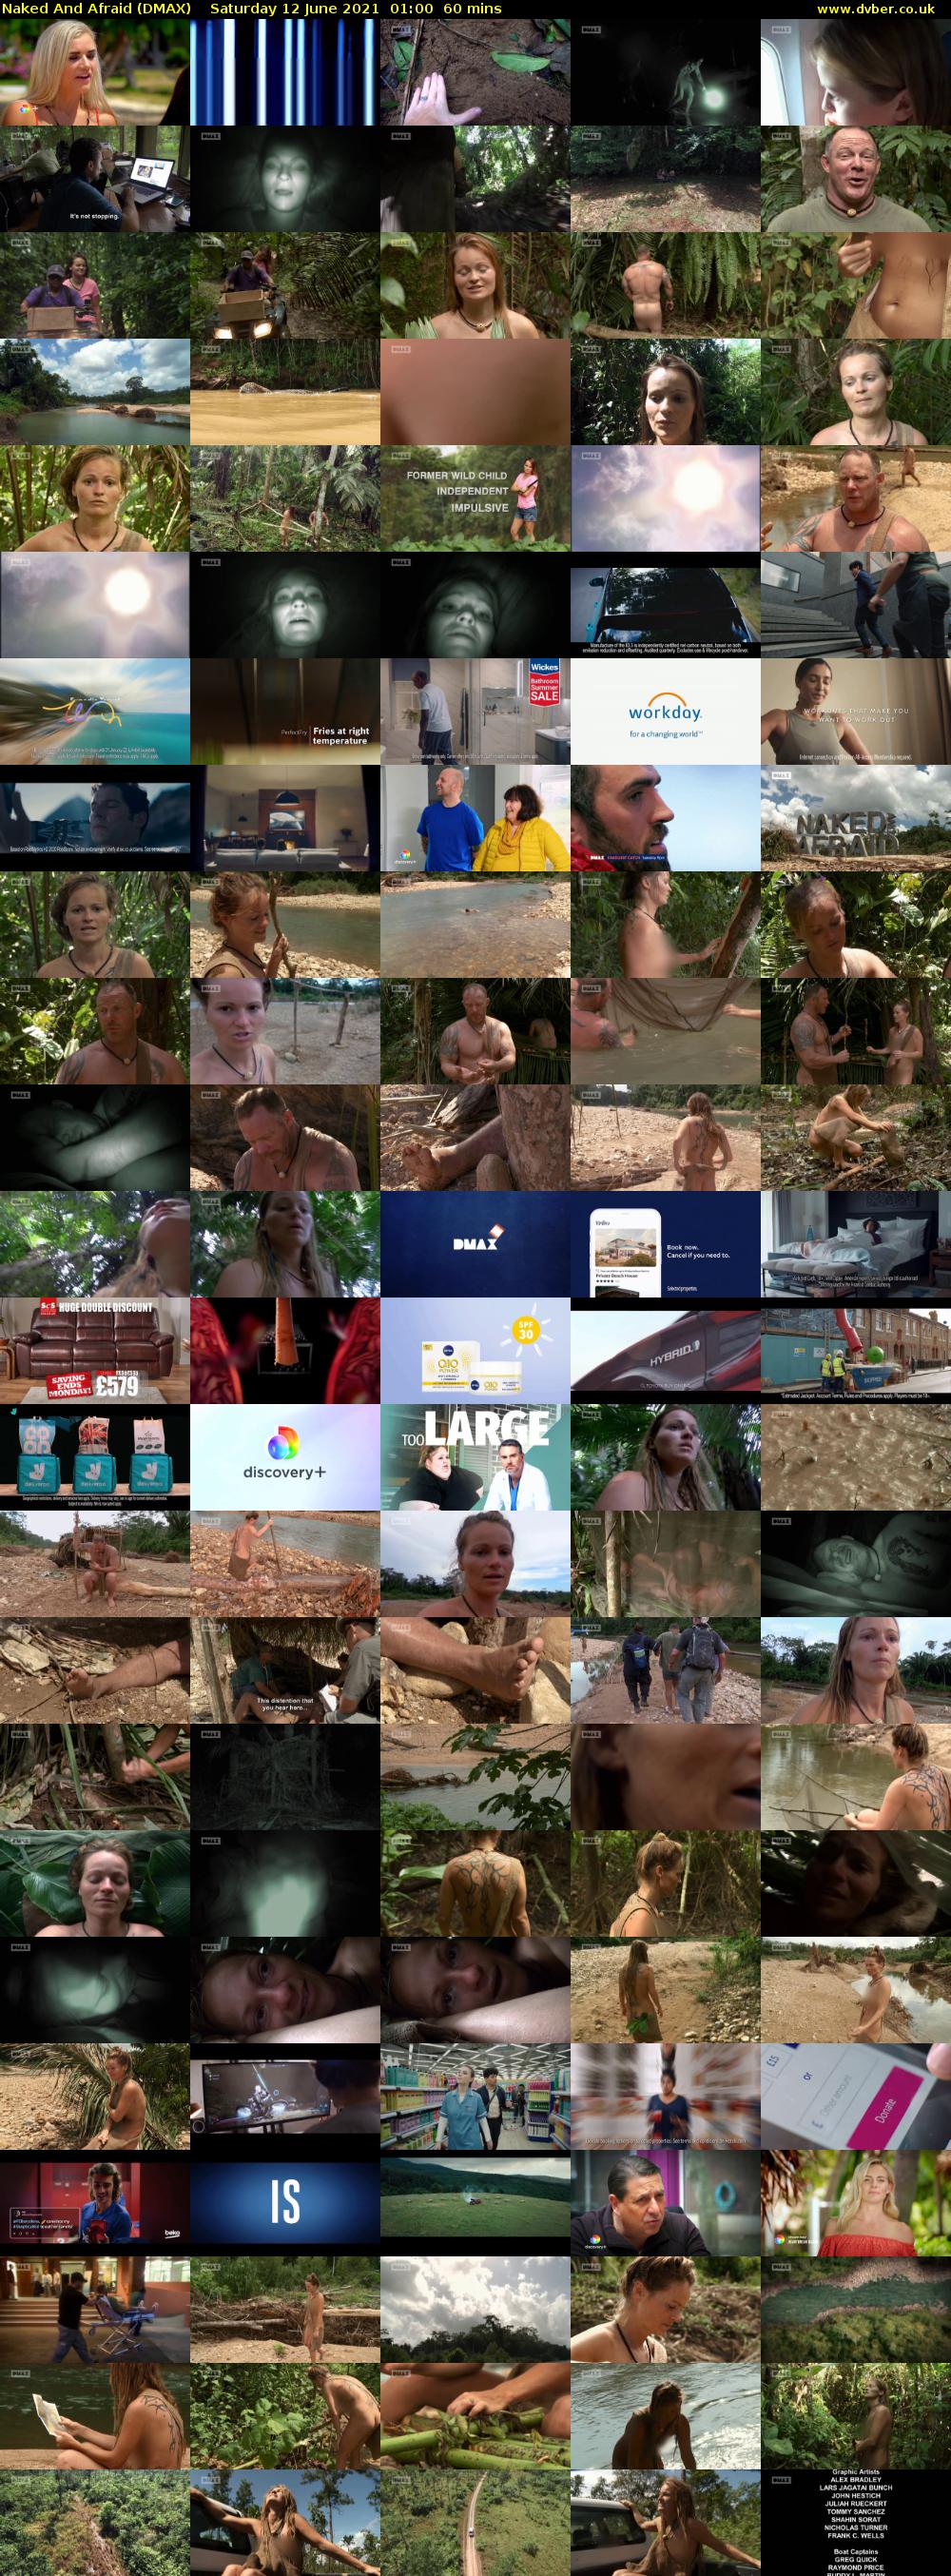 Naked And Afraid (DMAX) Saturday 12 June 2021 01:00 - 02:00